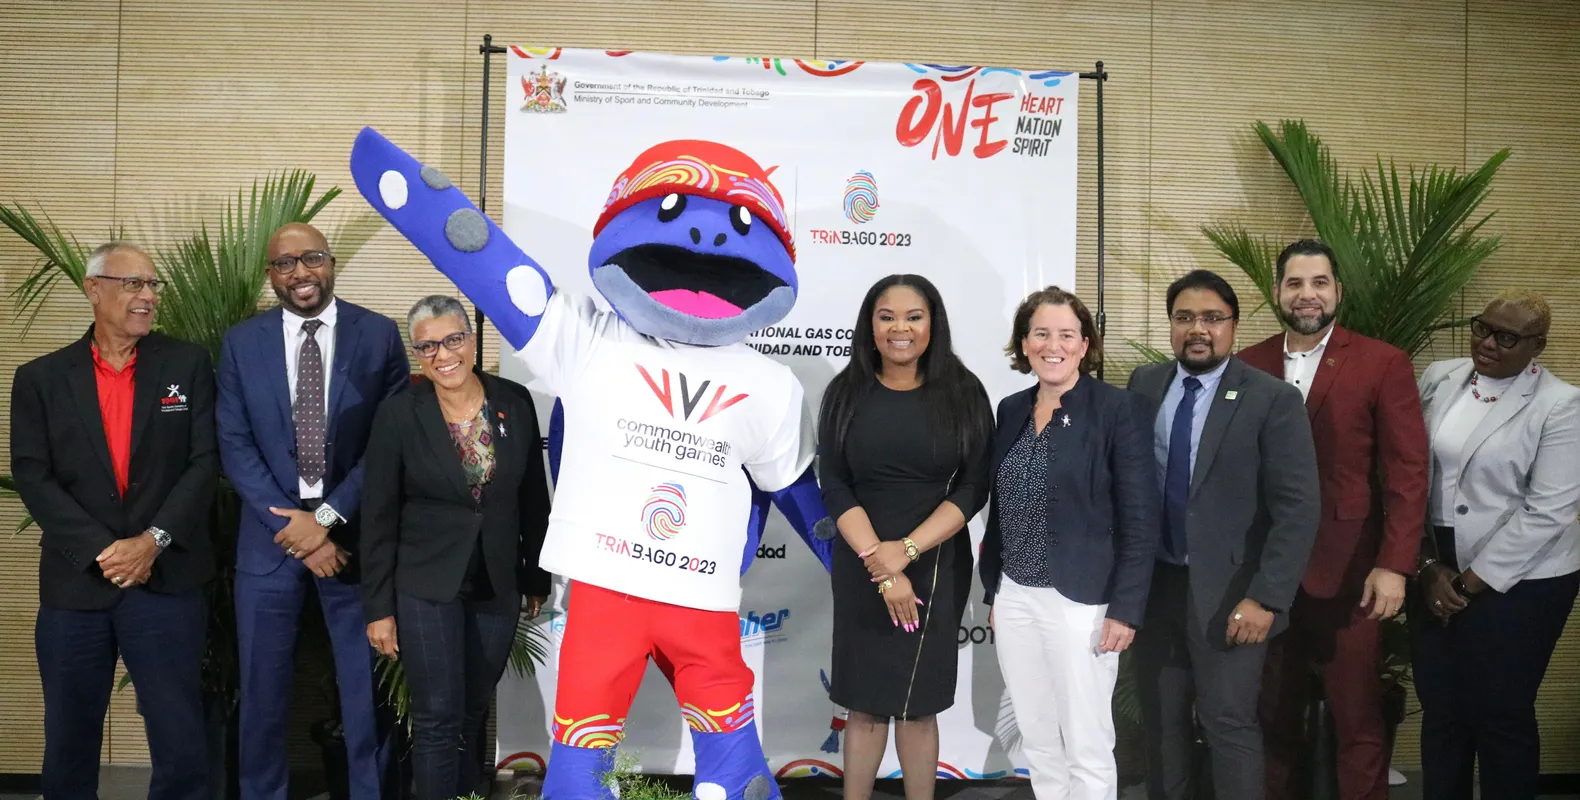 Public To Get Update Tuesday On Preparations For The Trinbago2023 Commonwealth Youth Games